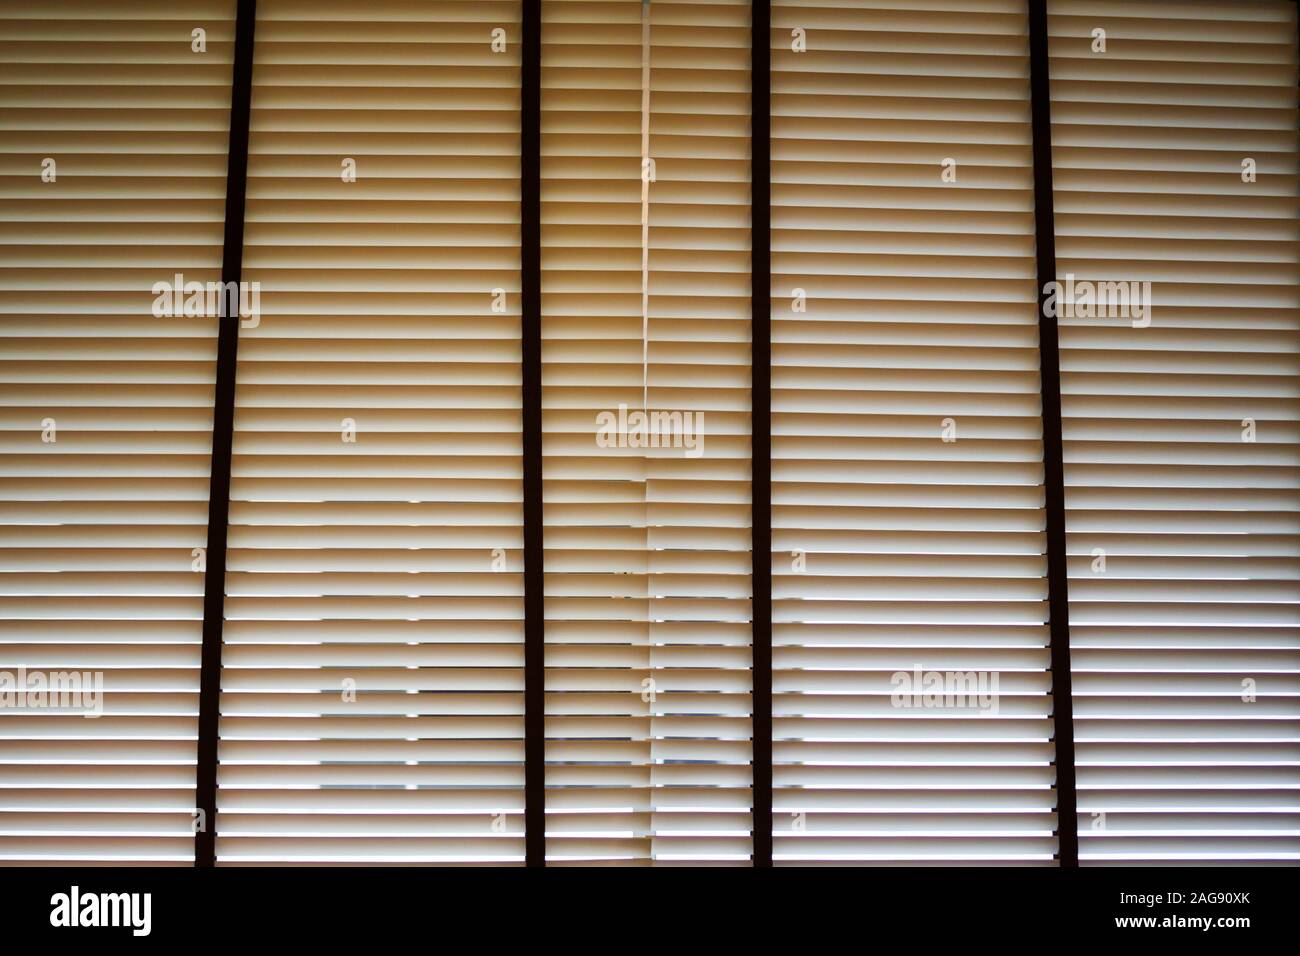 Close up of window blinds / windows jalousie / Venetian blinds / window shades shielding the interior of a room /office from outside view. To illustra Stock Photo